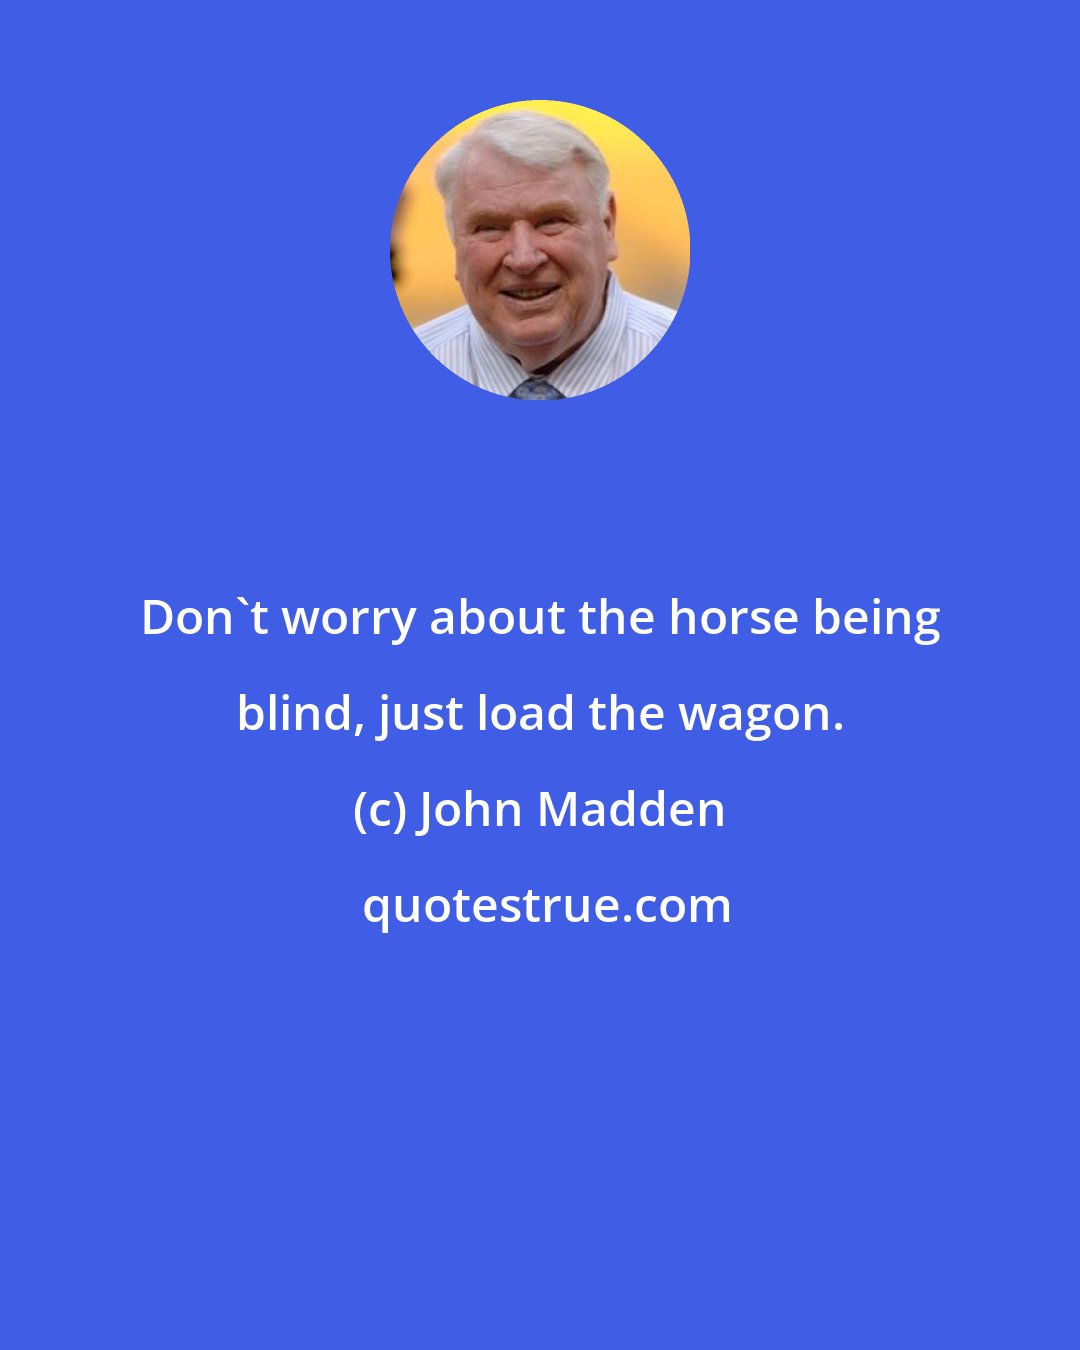 John Madden: Don't worry about the horse being blind, just load the wagon.